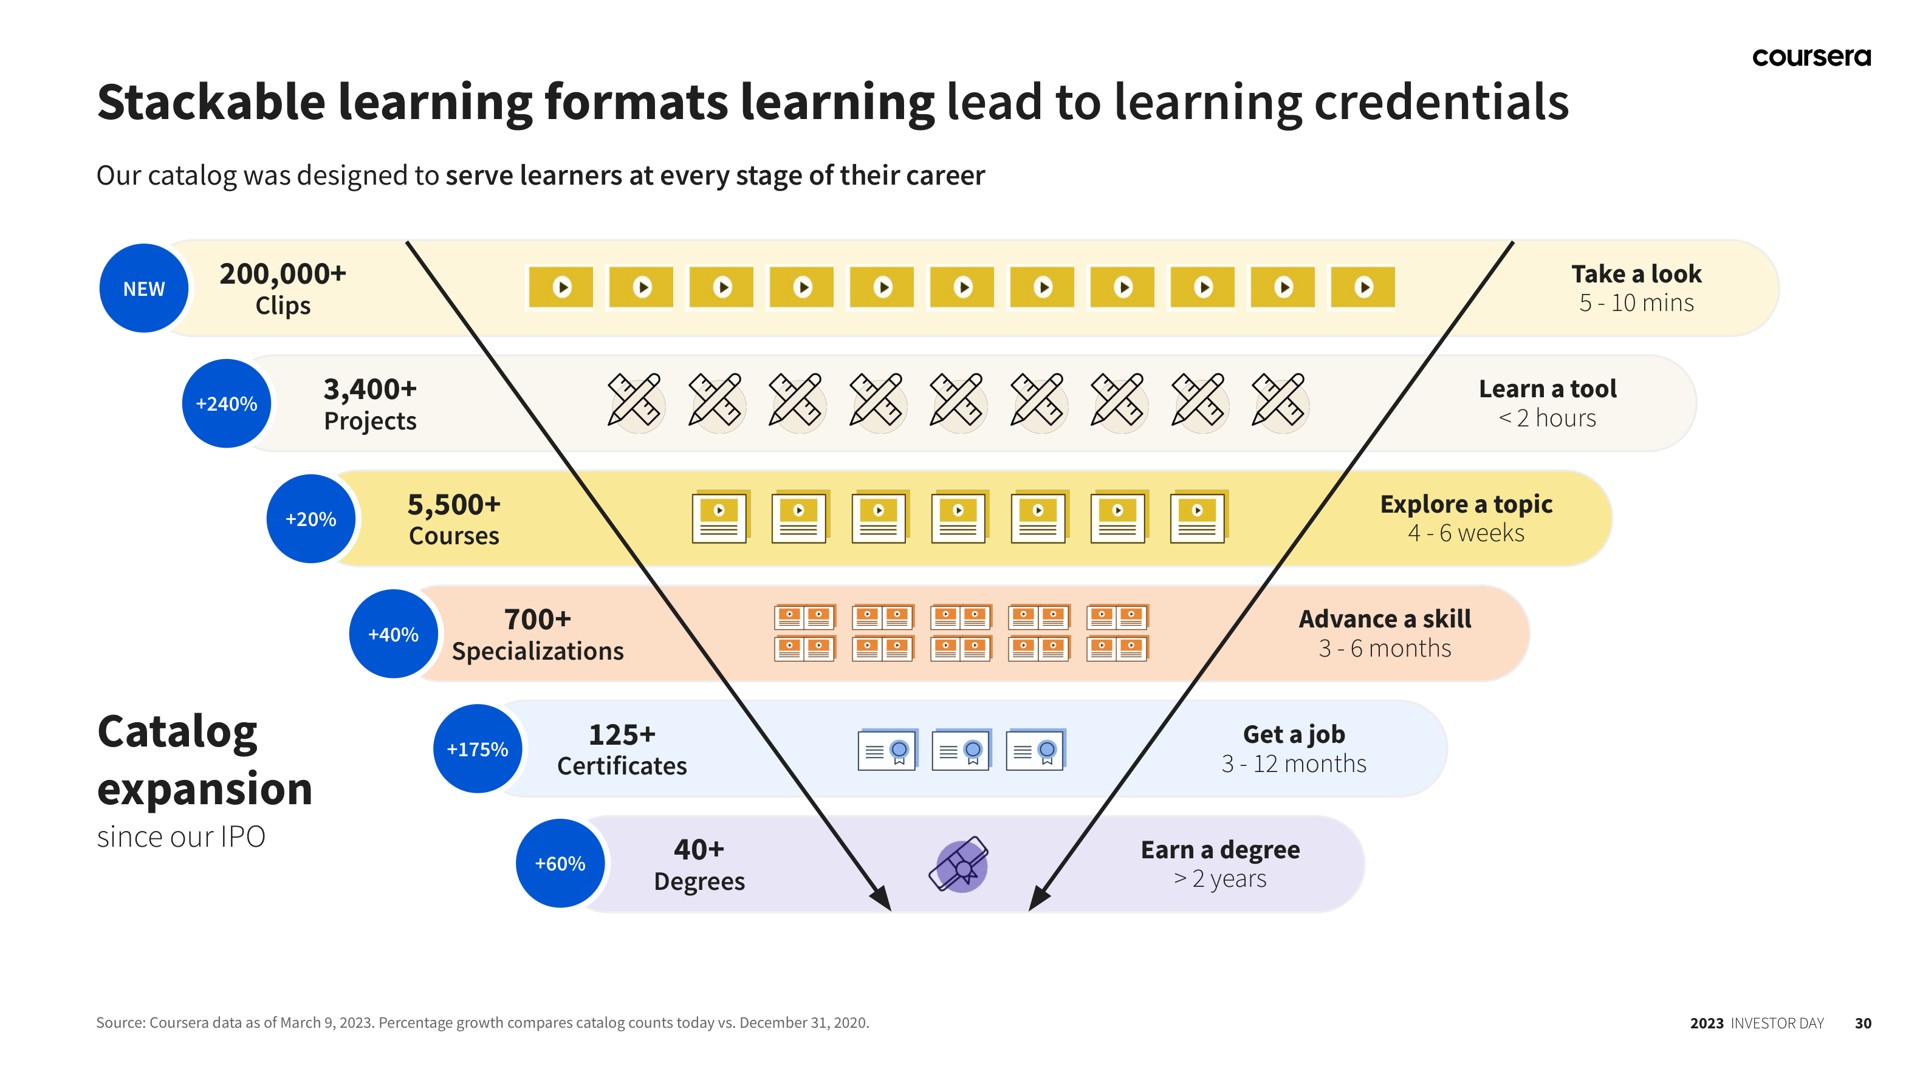 learning formats learning lead to learning credentials expansion | Coursera